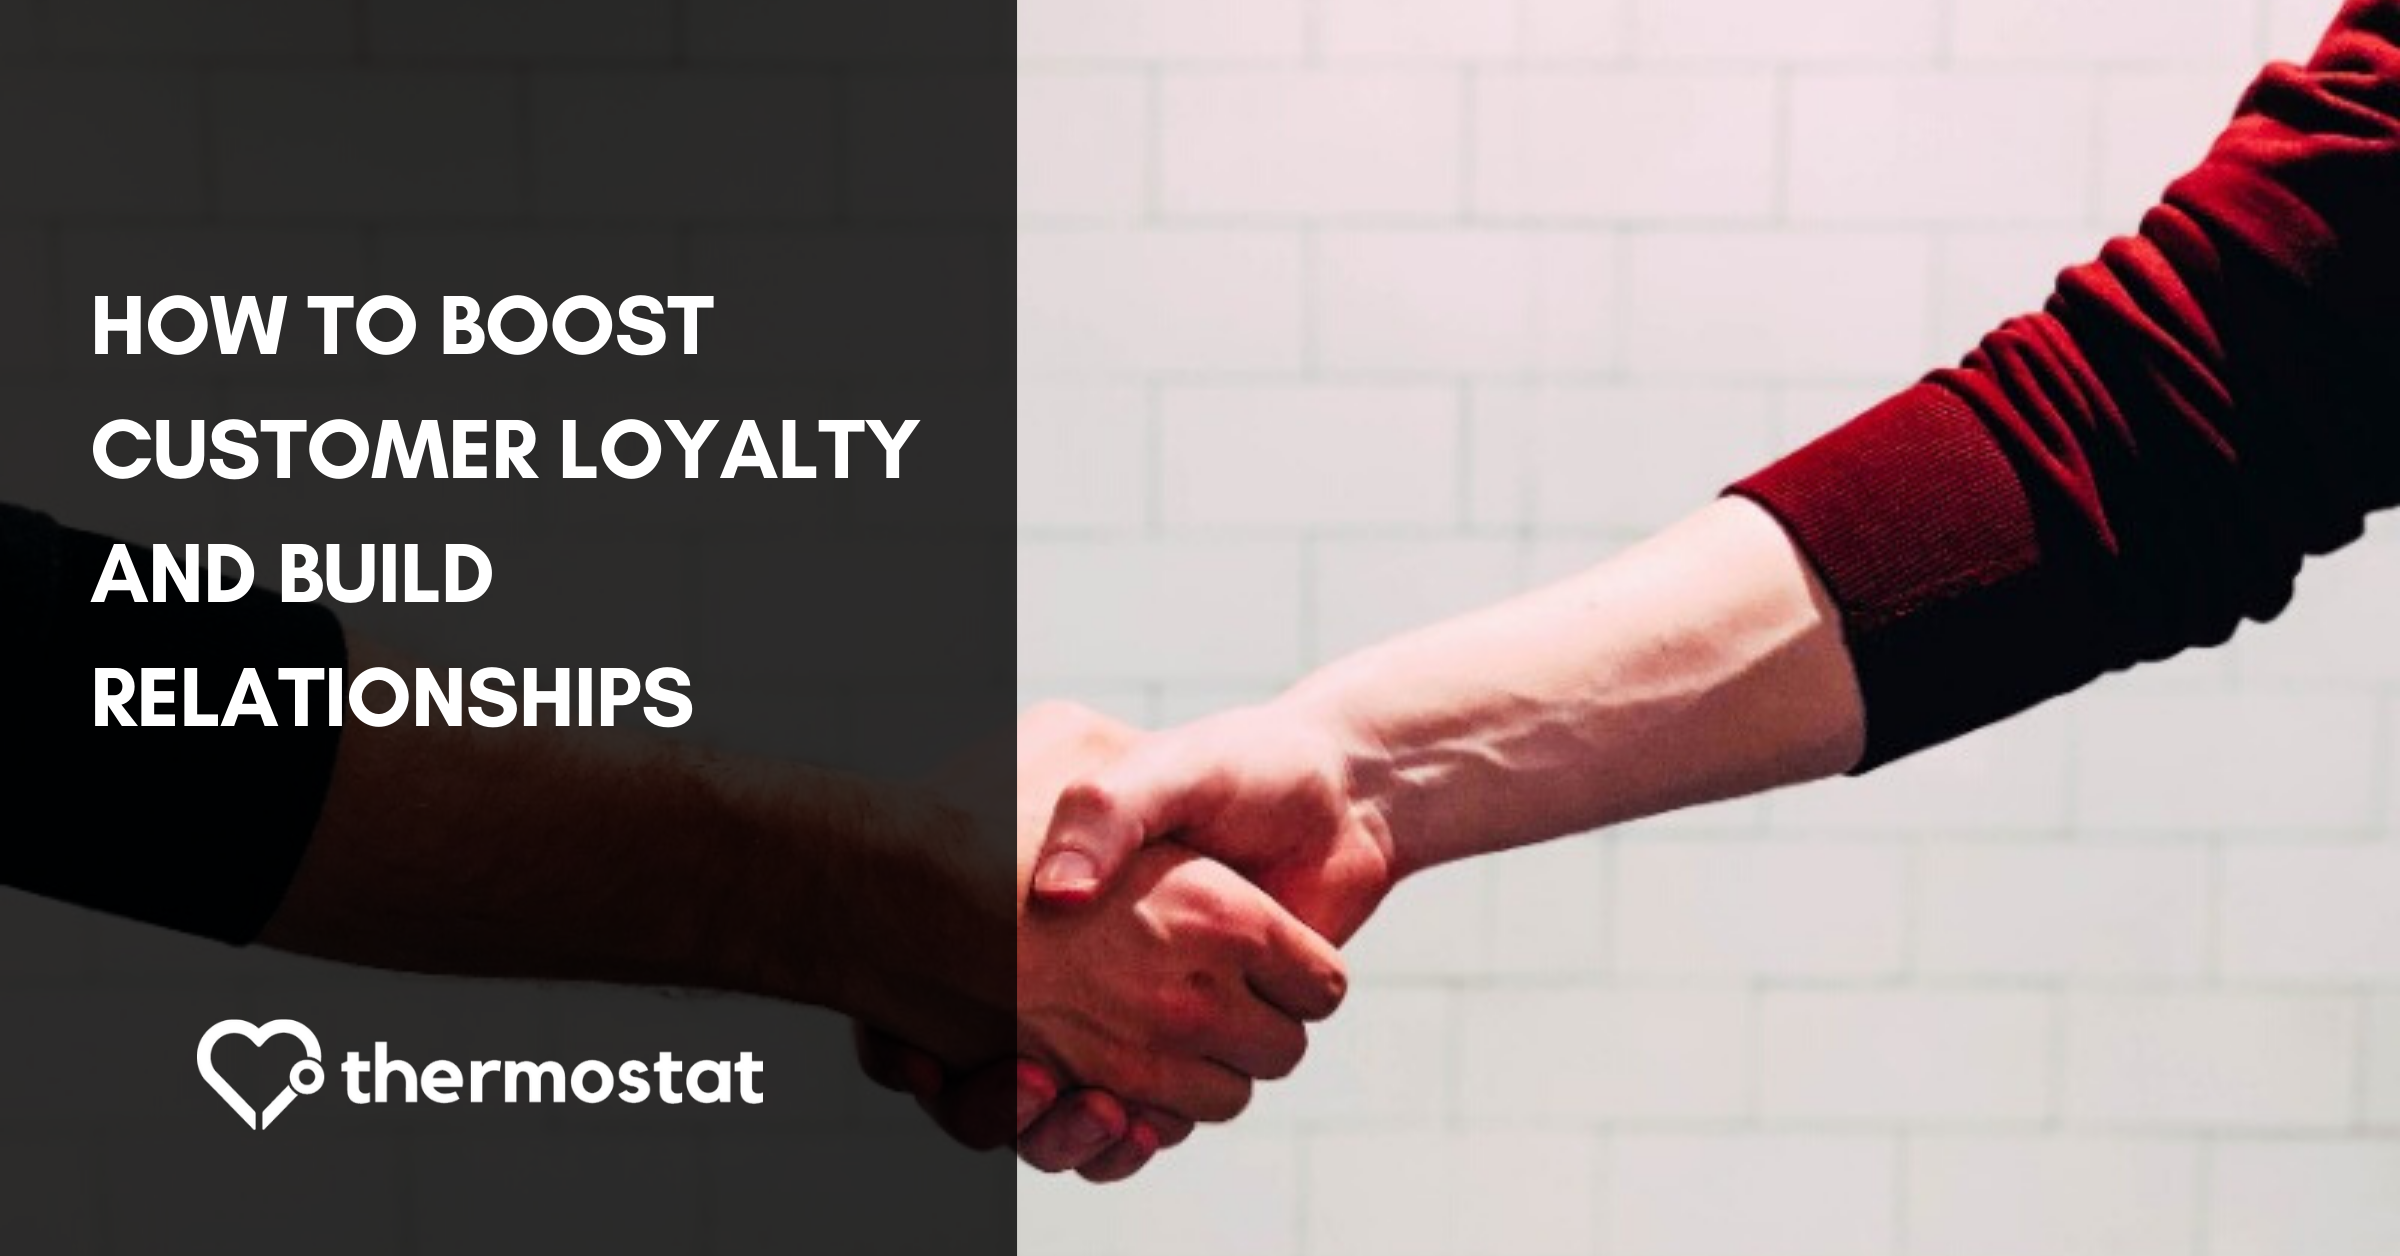 How to Boost Customer Loyalty and Build Relationships cover photo